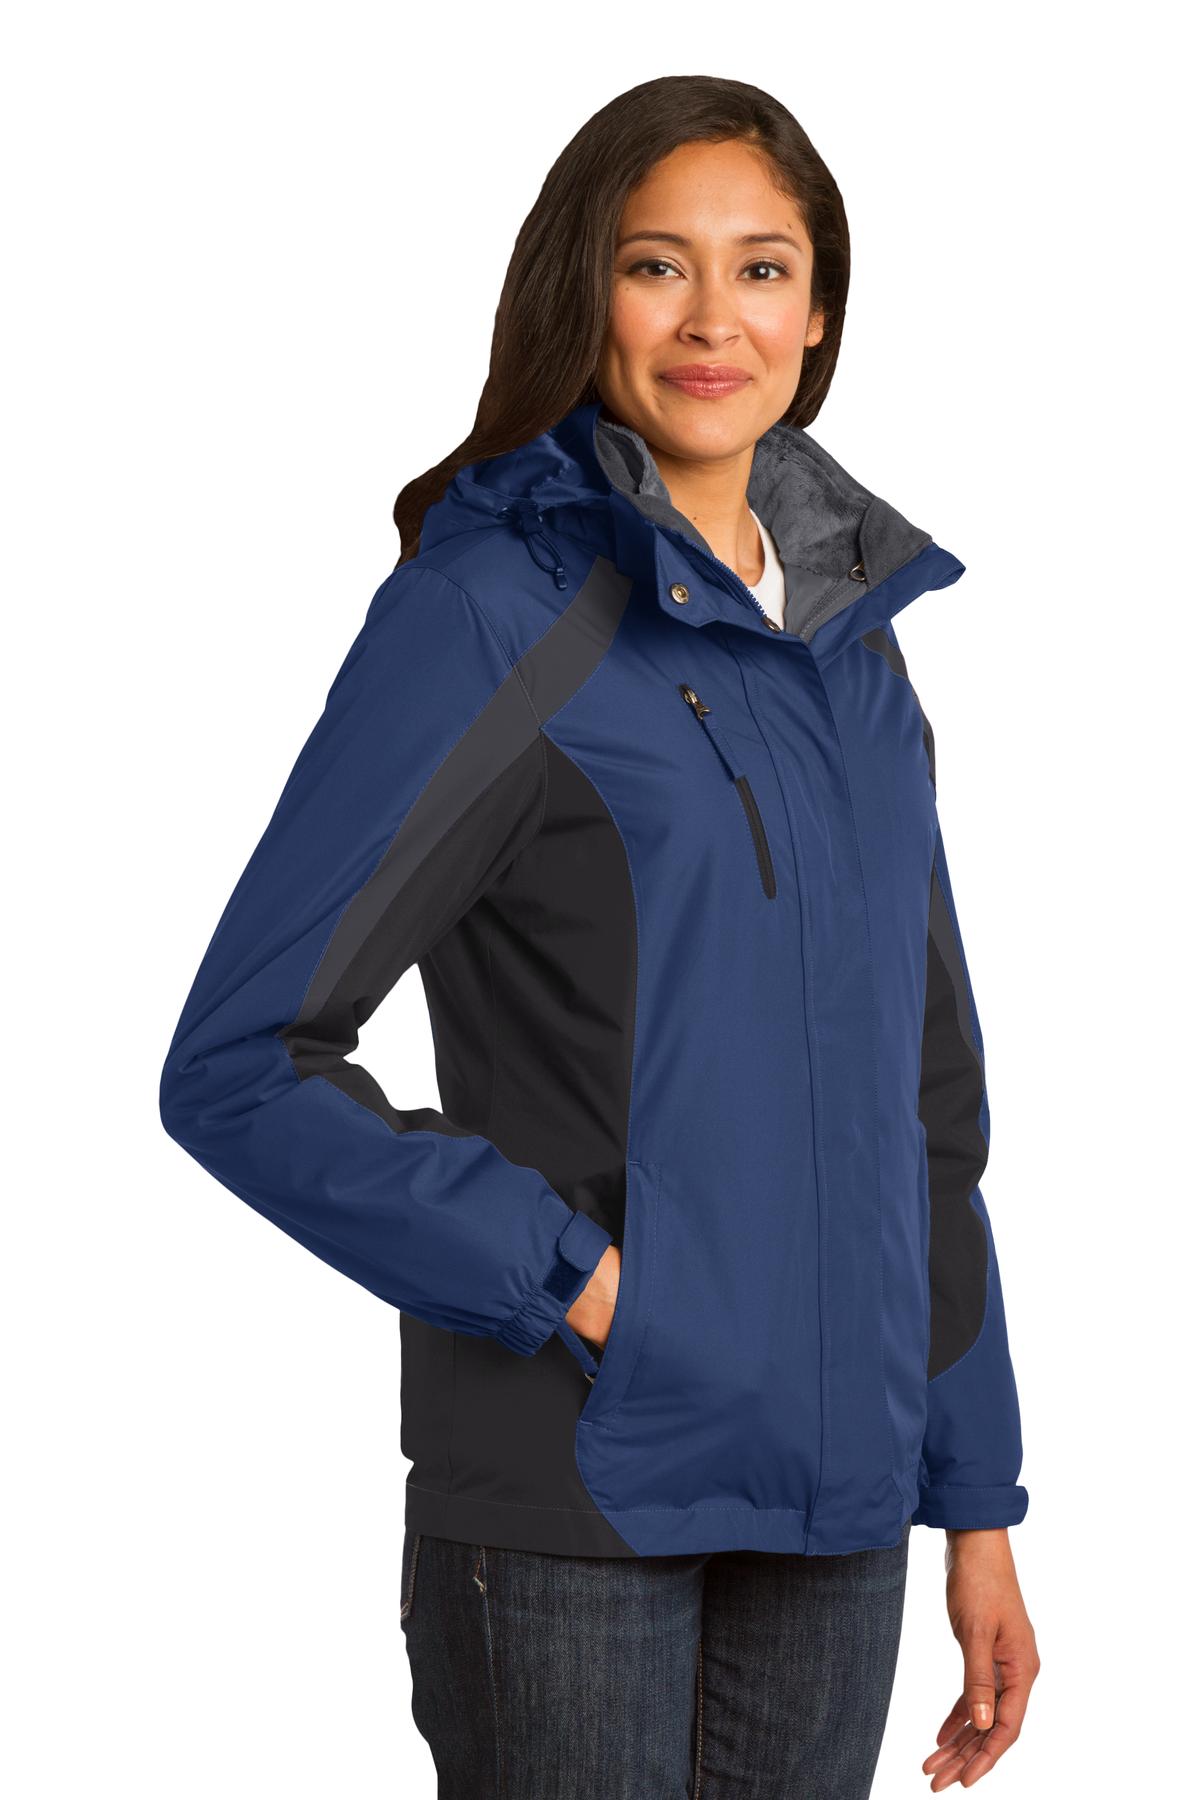 Port Authority Ladies Colorblock 3 in 1 Jacket-S (Admiral Blue/ Black/ Magnet Grey) - image 4 of 5